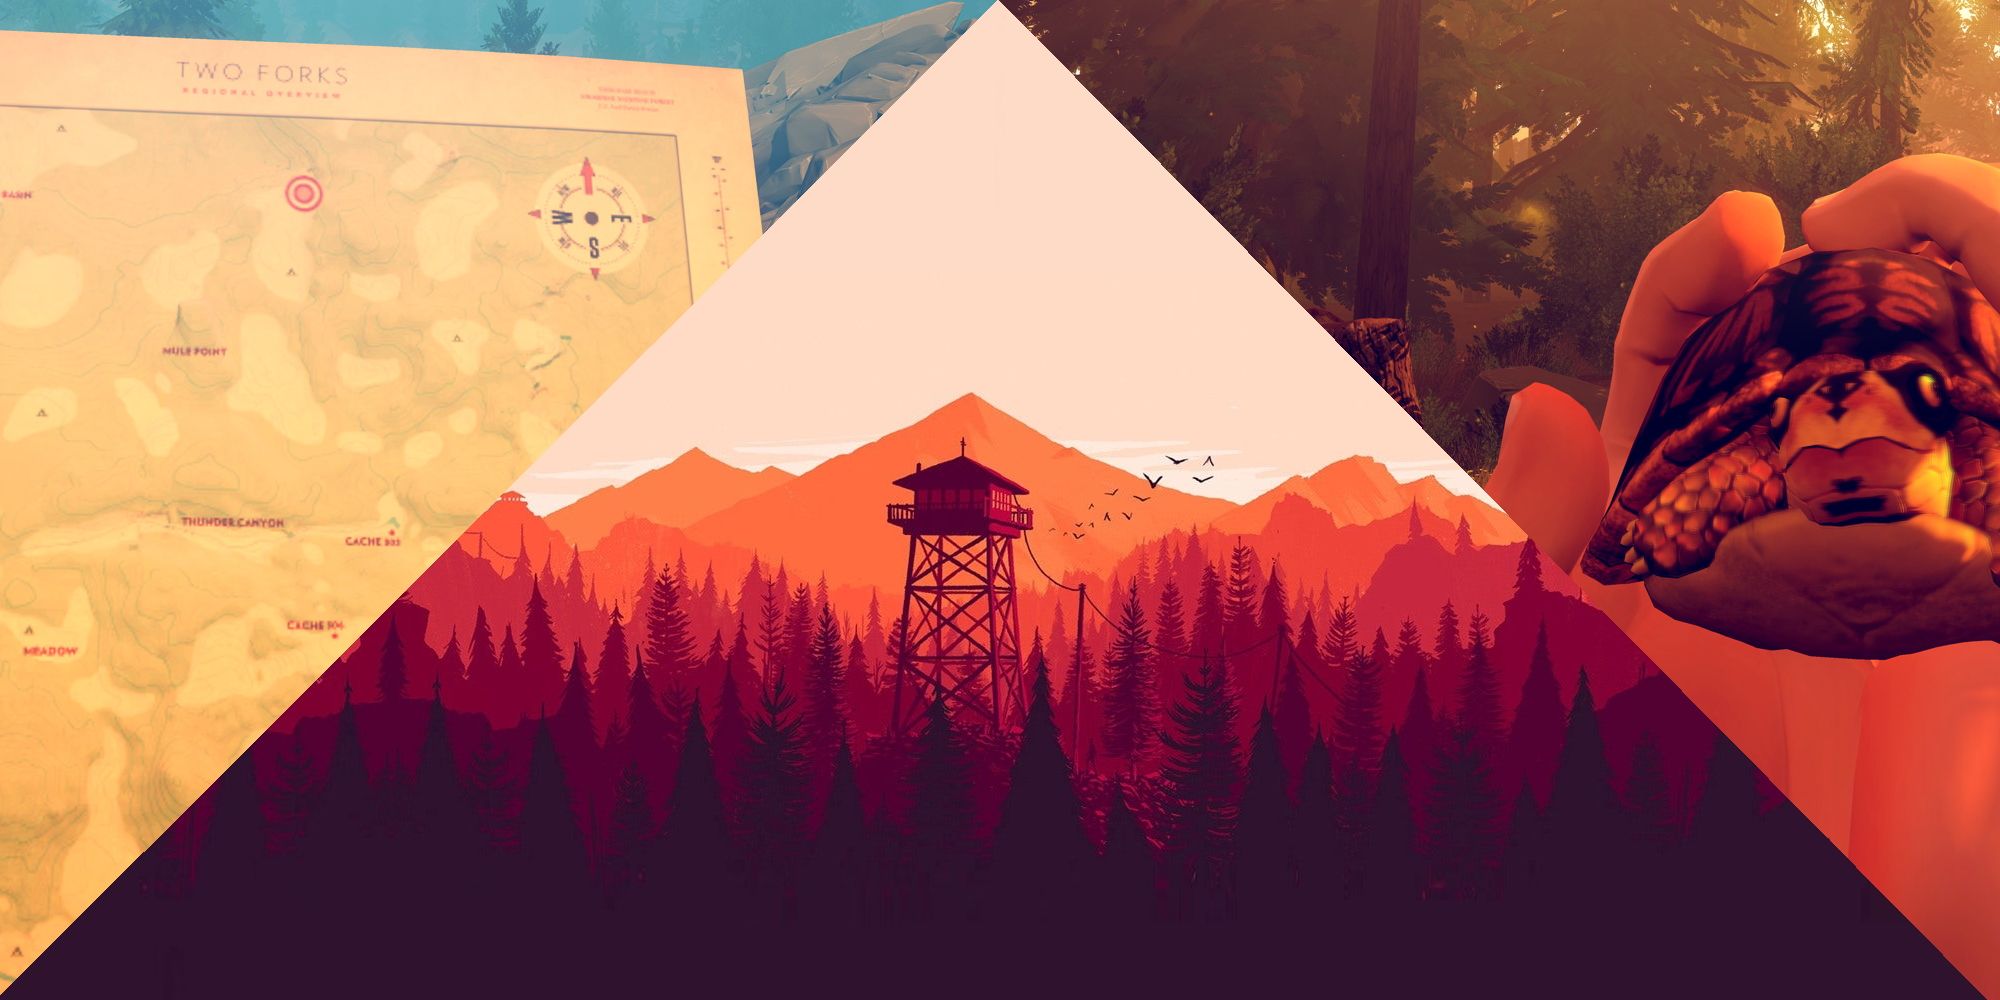 Firewatch Featured Image (showing the watchtower, a map of the park, and Henry's turtle pet)